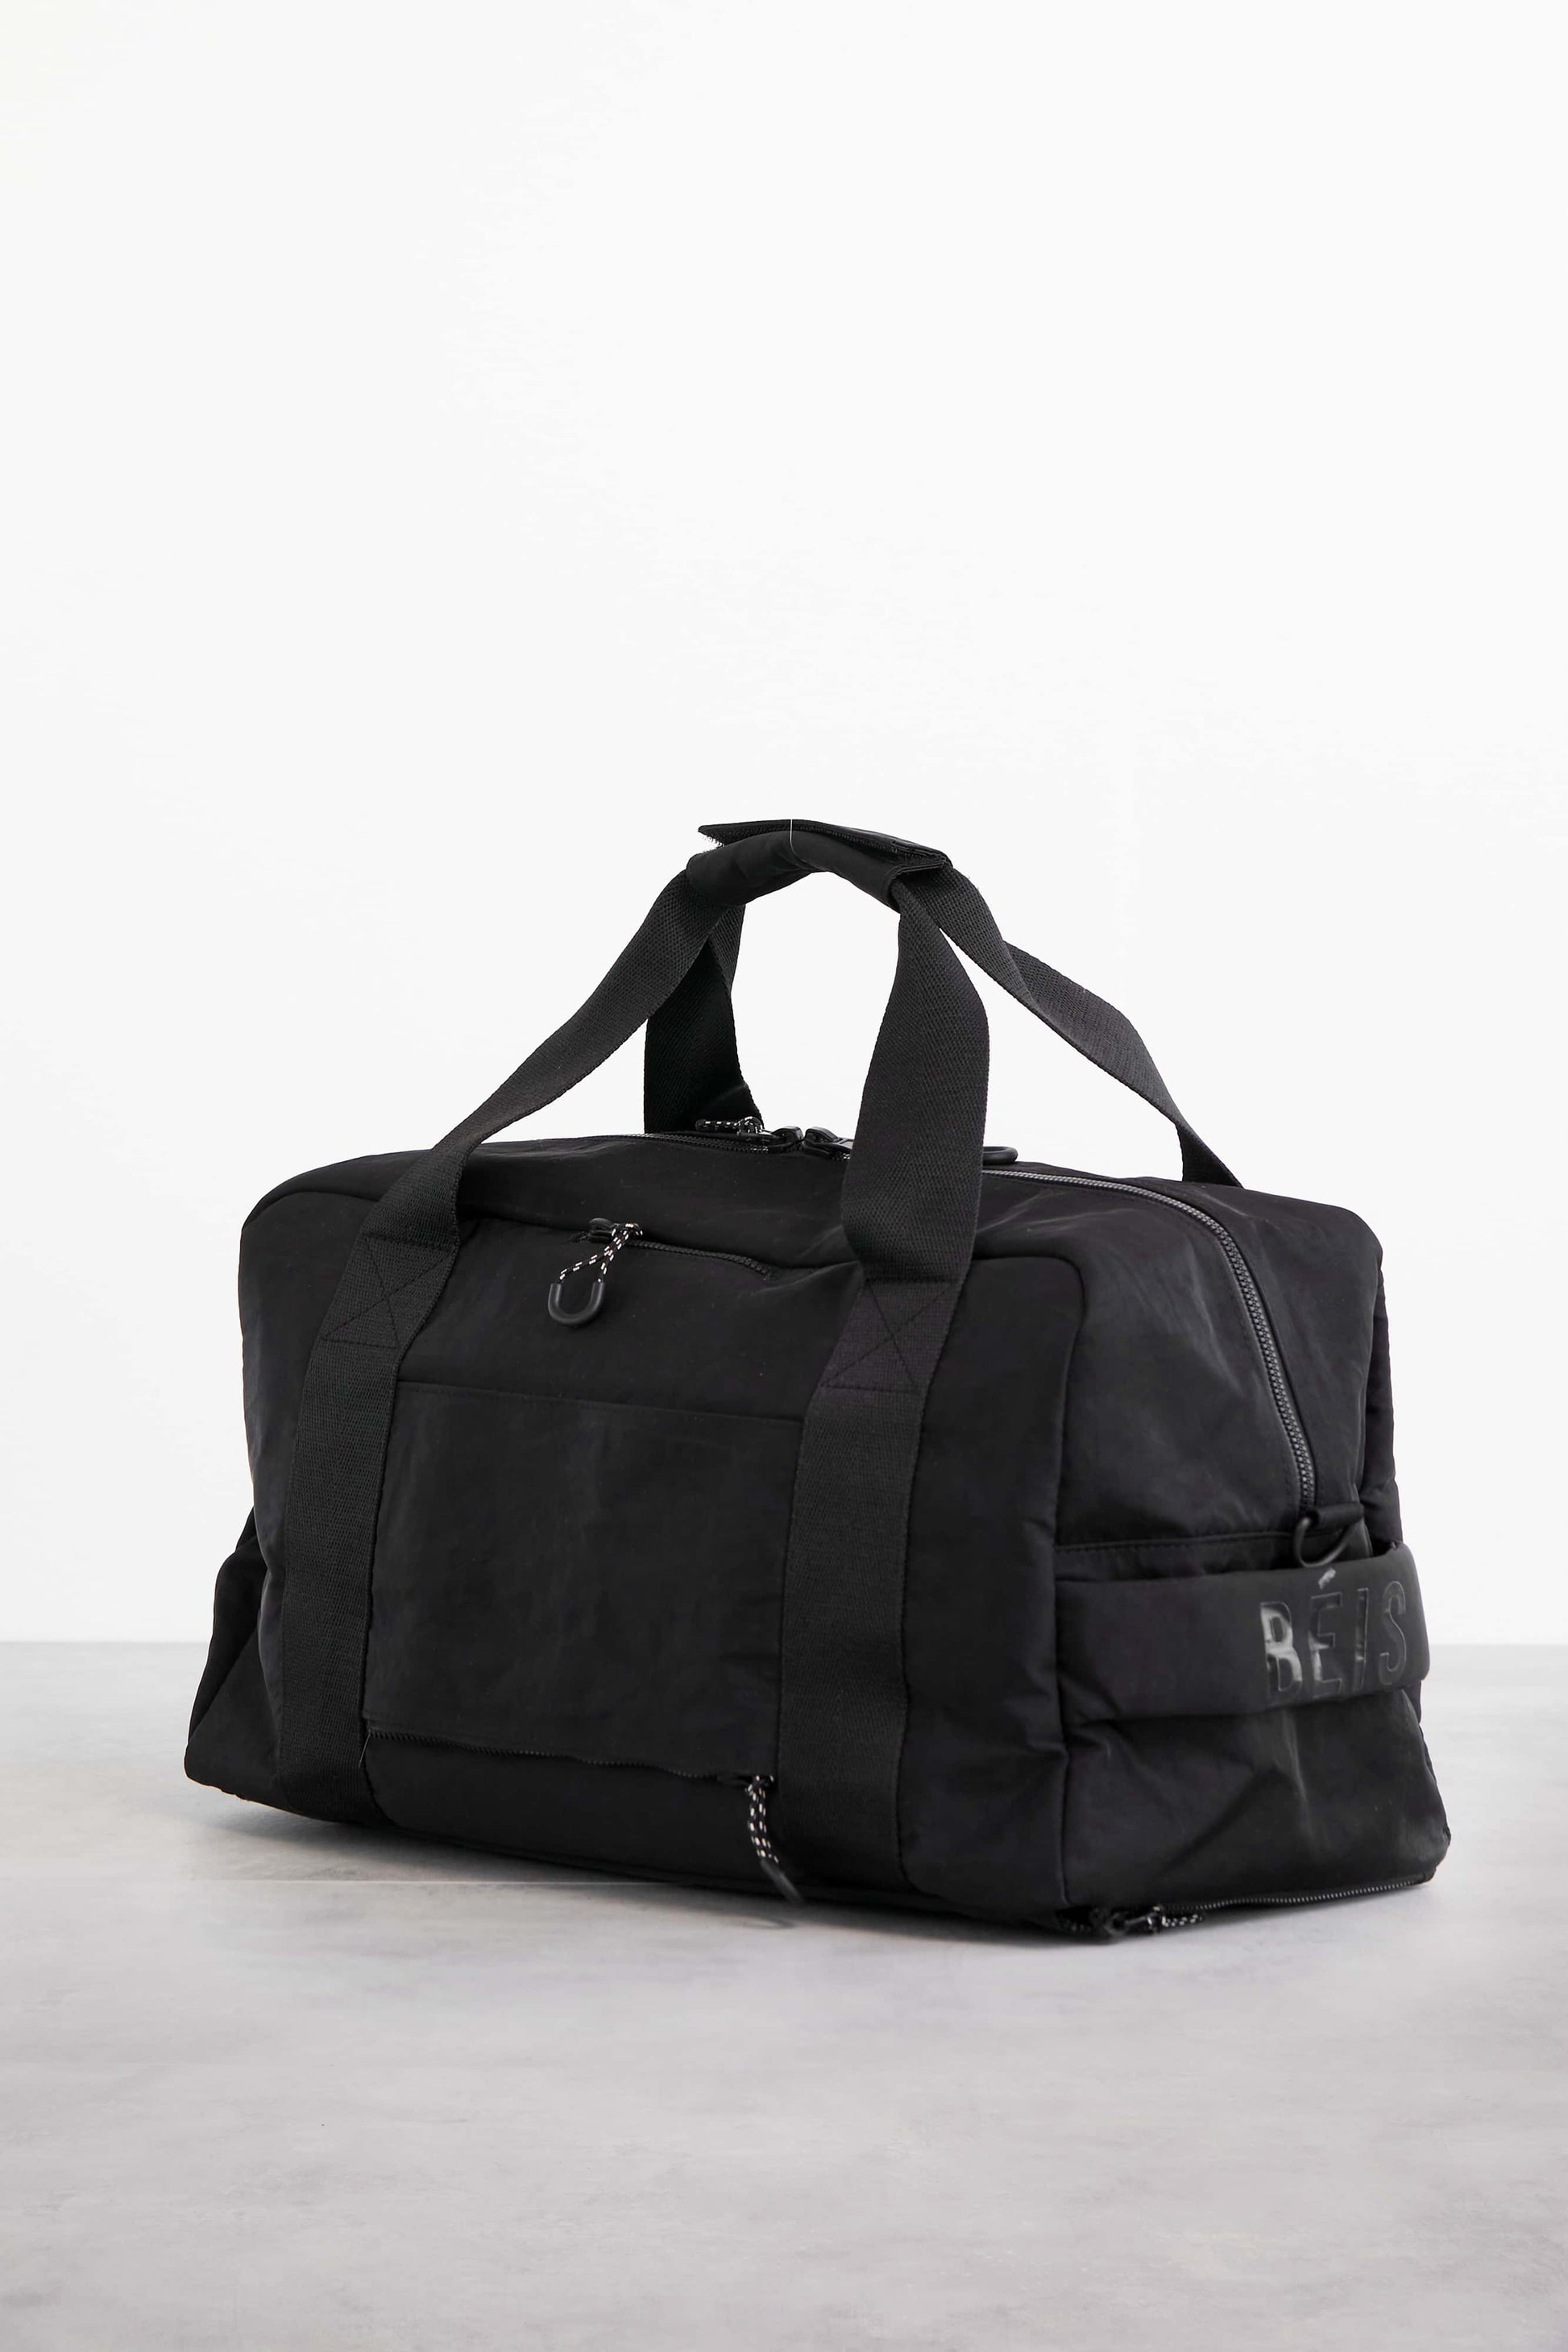 Sport Duffle Black Back and Side